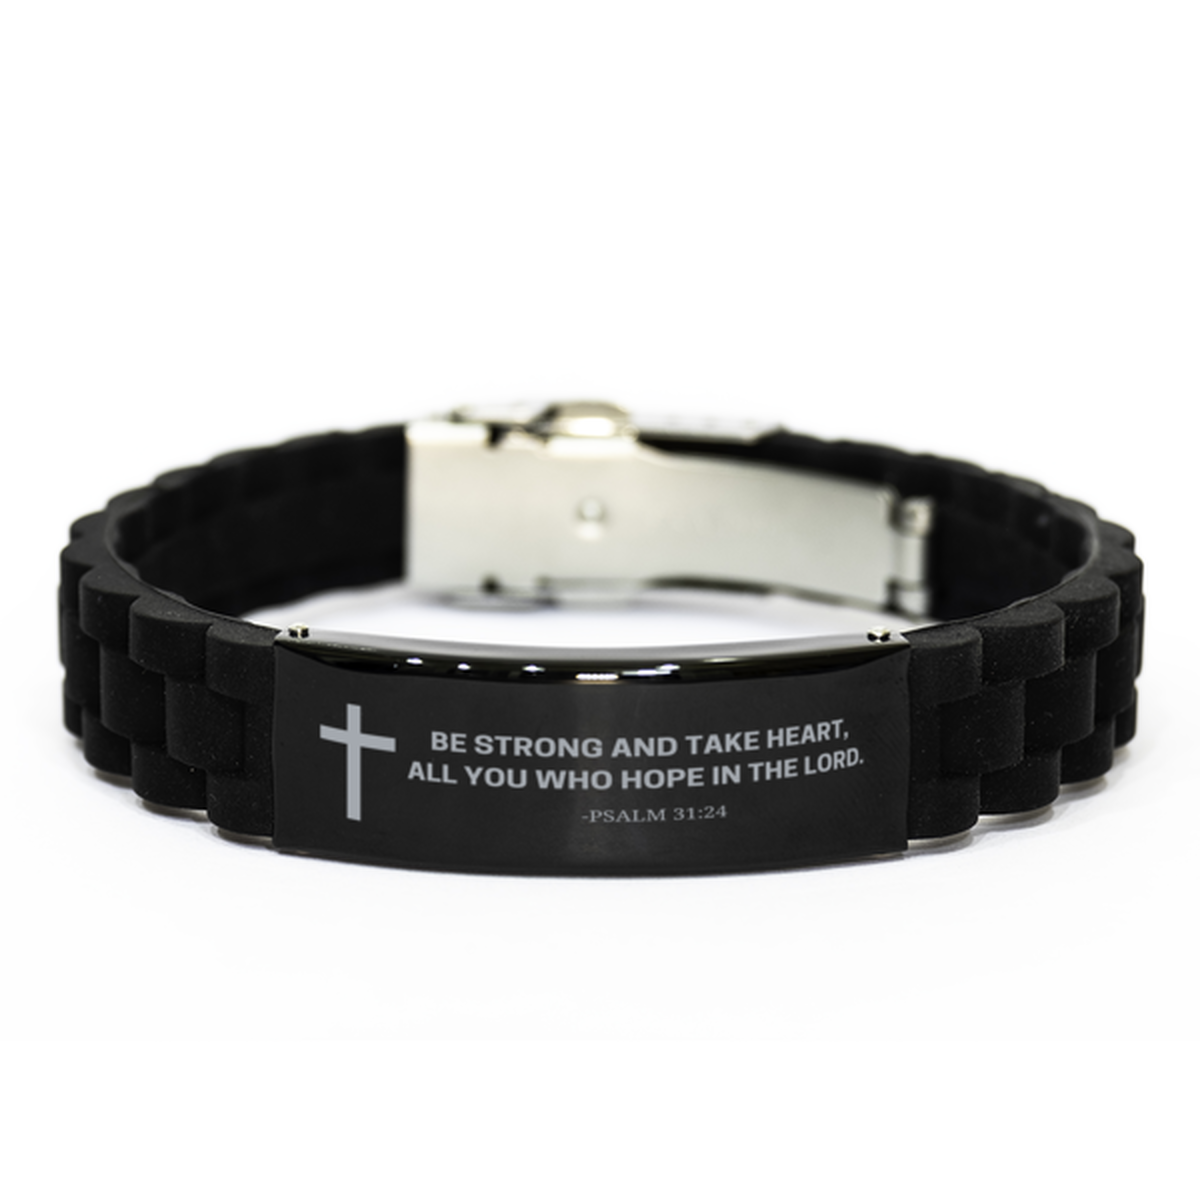 Baptism Gifts For Teenage Boys Girls, Christian Bible Verse Black Glidelock Clasp Bracelet, Be strong and take heart, Catholic Confirmation Gifts for Son, Godson, Grandson, Nephew